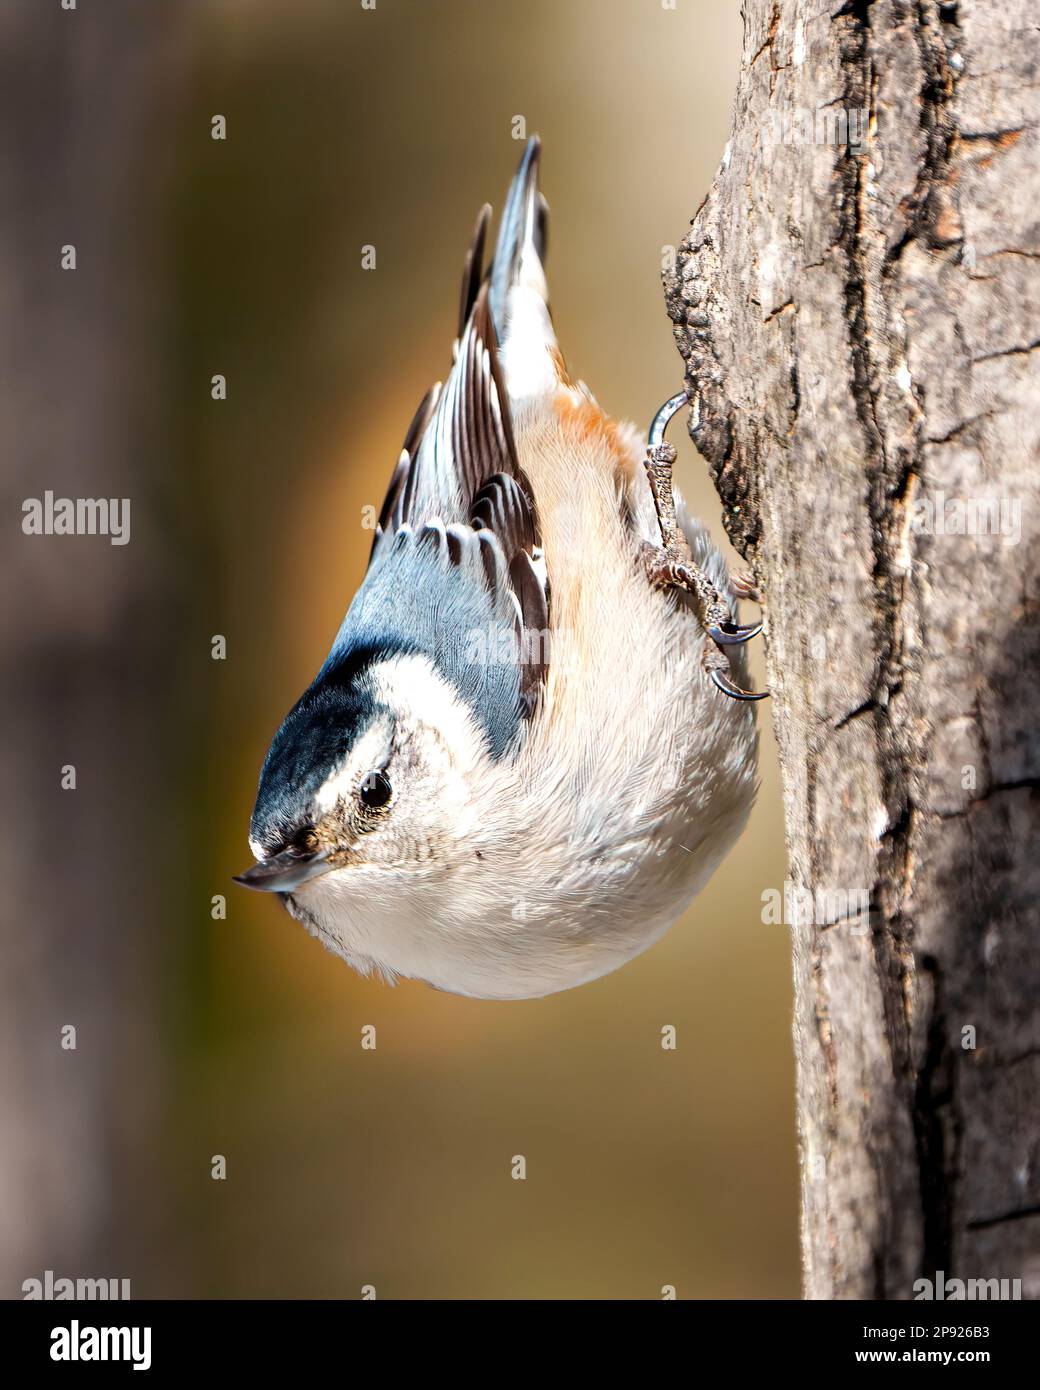 White-breasted Nuthatch perched on a tree trunk with a blur background in its environment and habitat surrounding.  Nuthatch Portrait looking down. Stock Photo